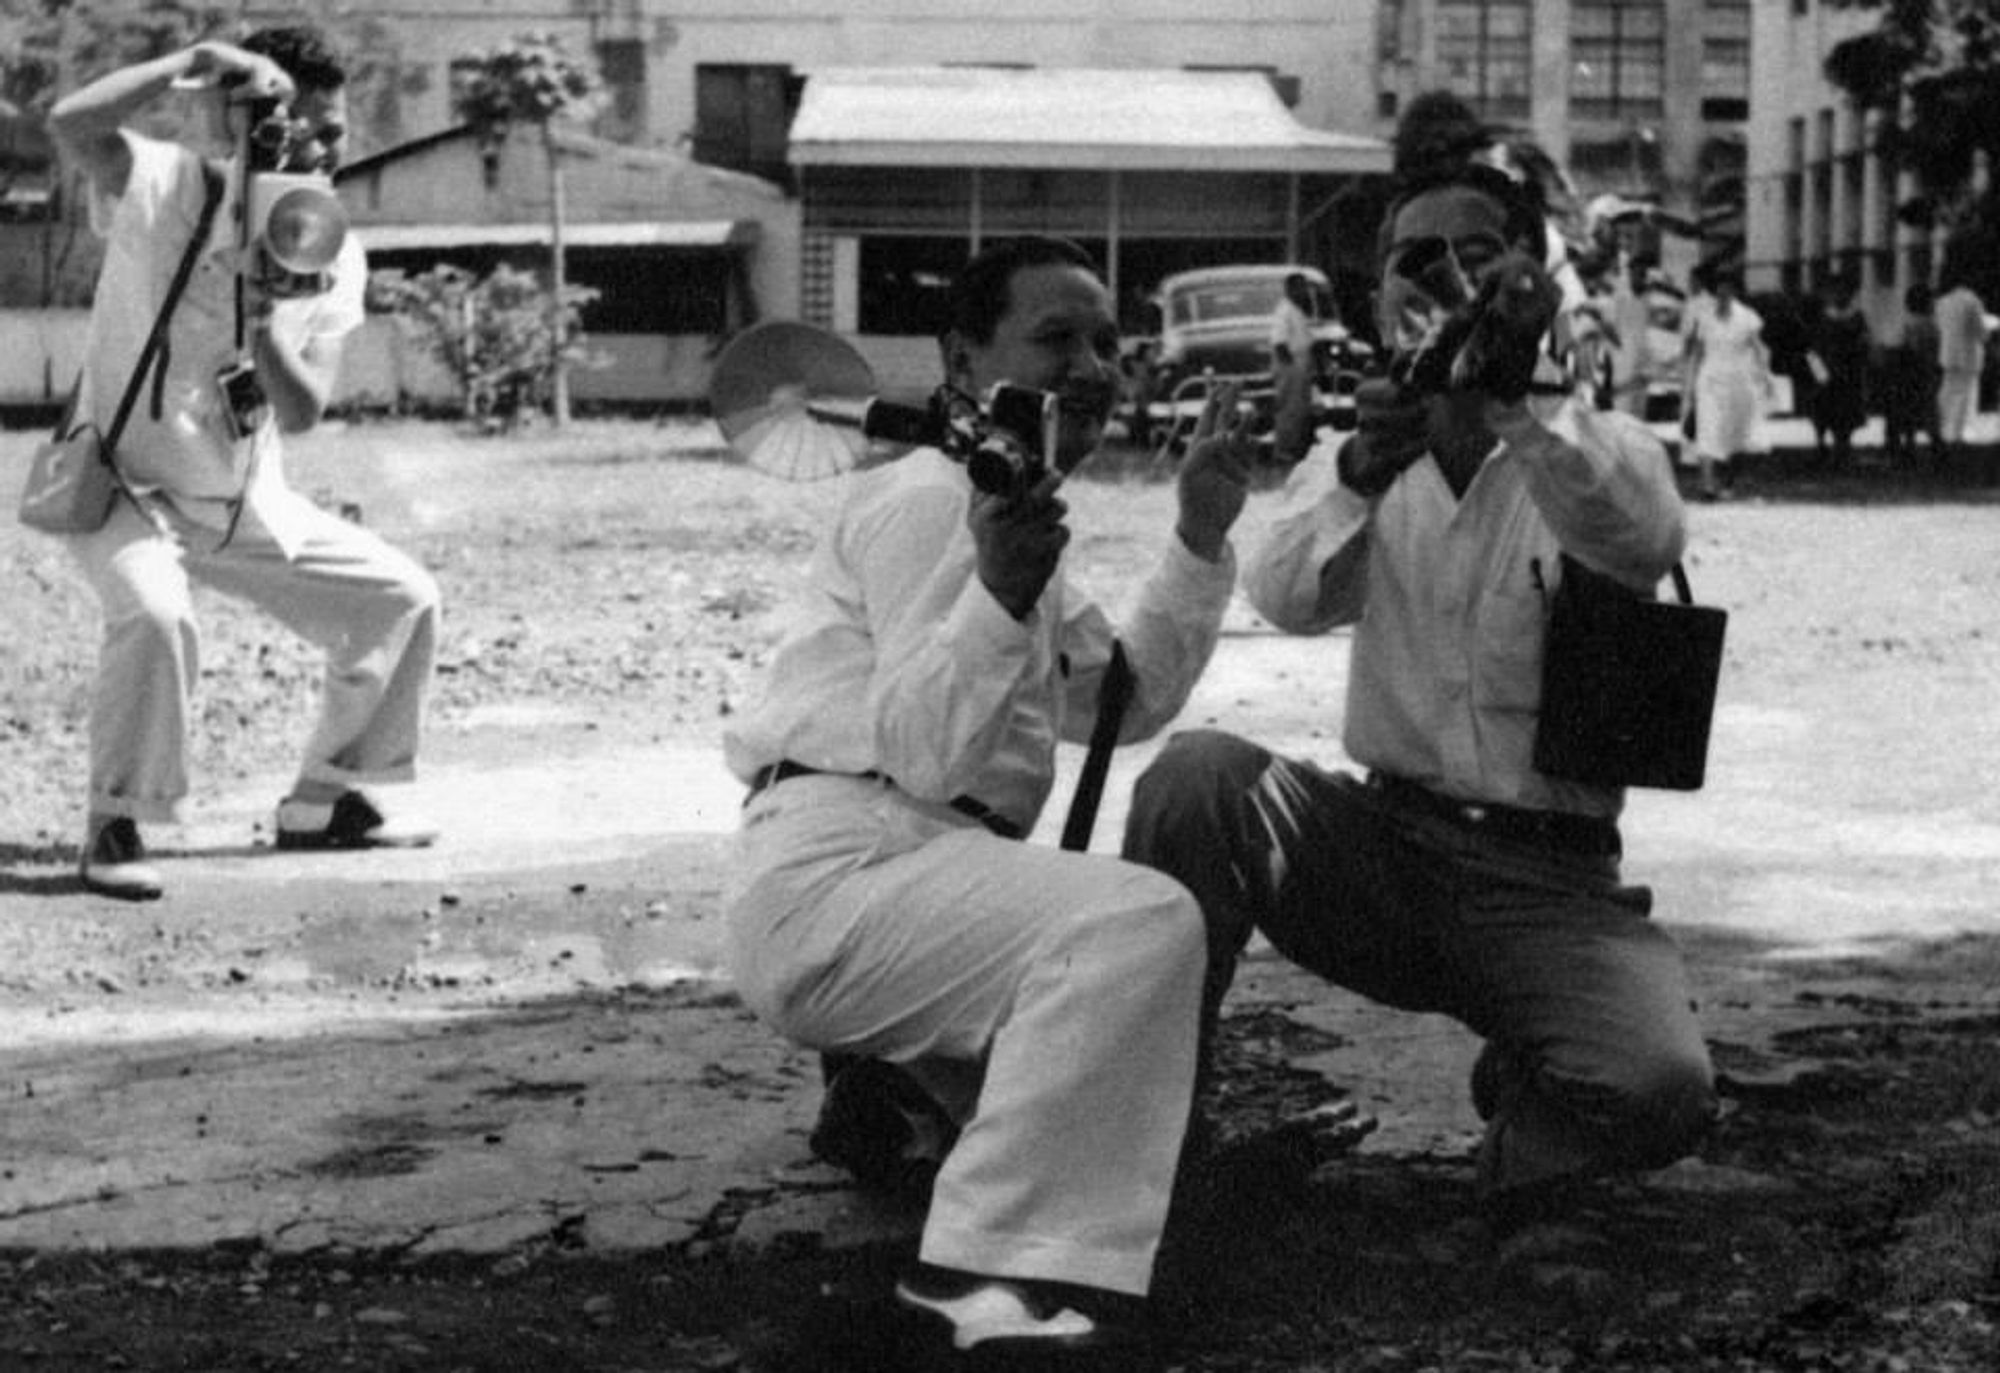 A black-and-white photograph of Protomartir and another photographer crouched on the street and holding their cameras. They are wearing button-up shirts with slacks and are looking in the same direction.